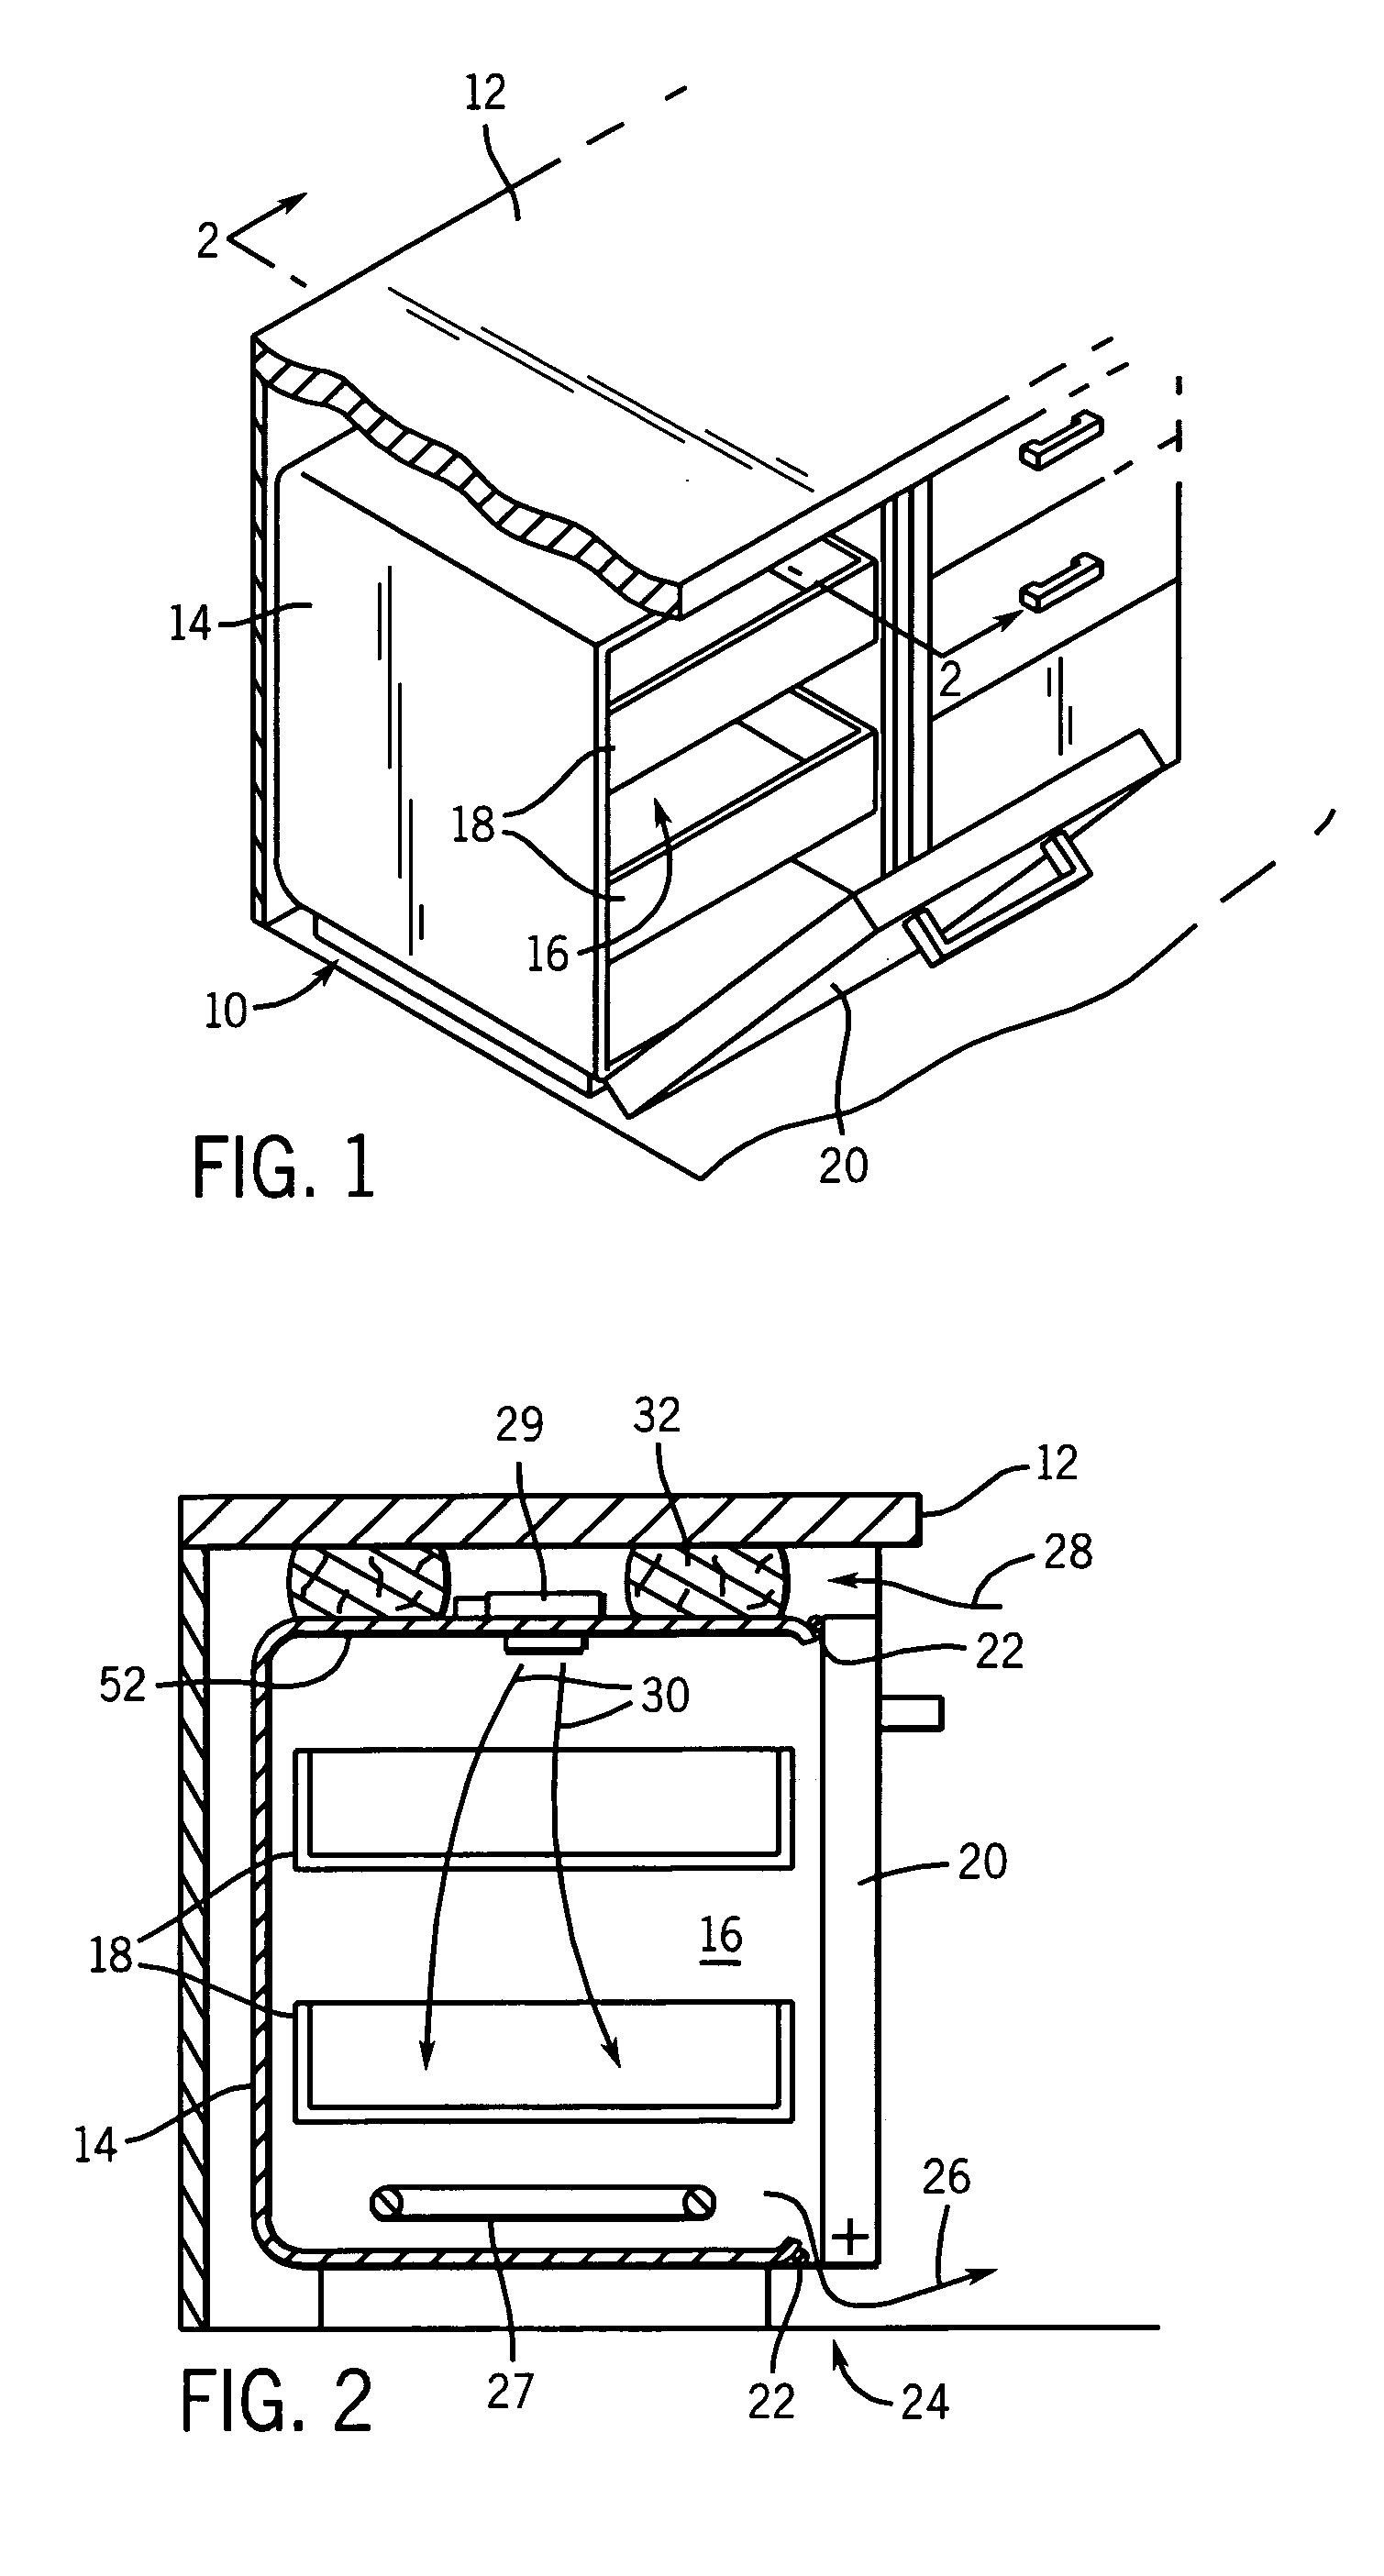 Dishwasher with counter-convection air flow